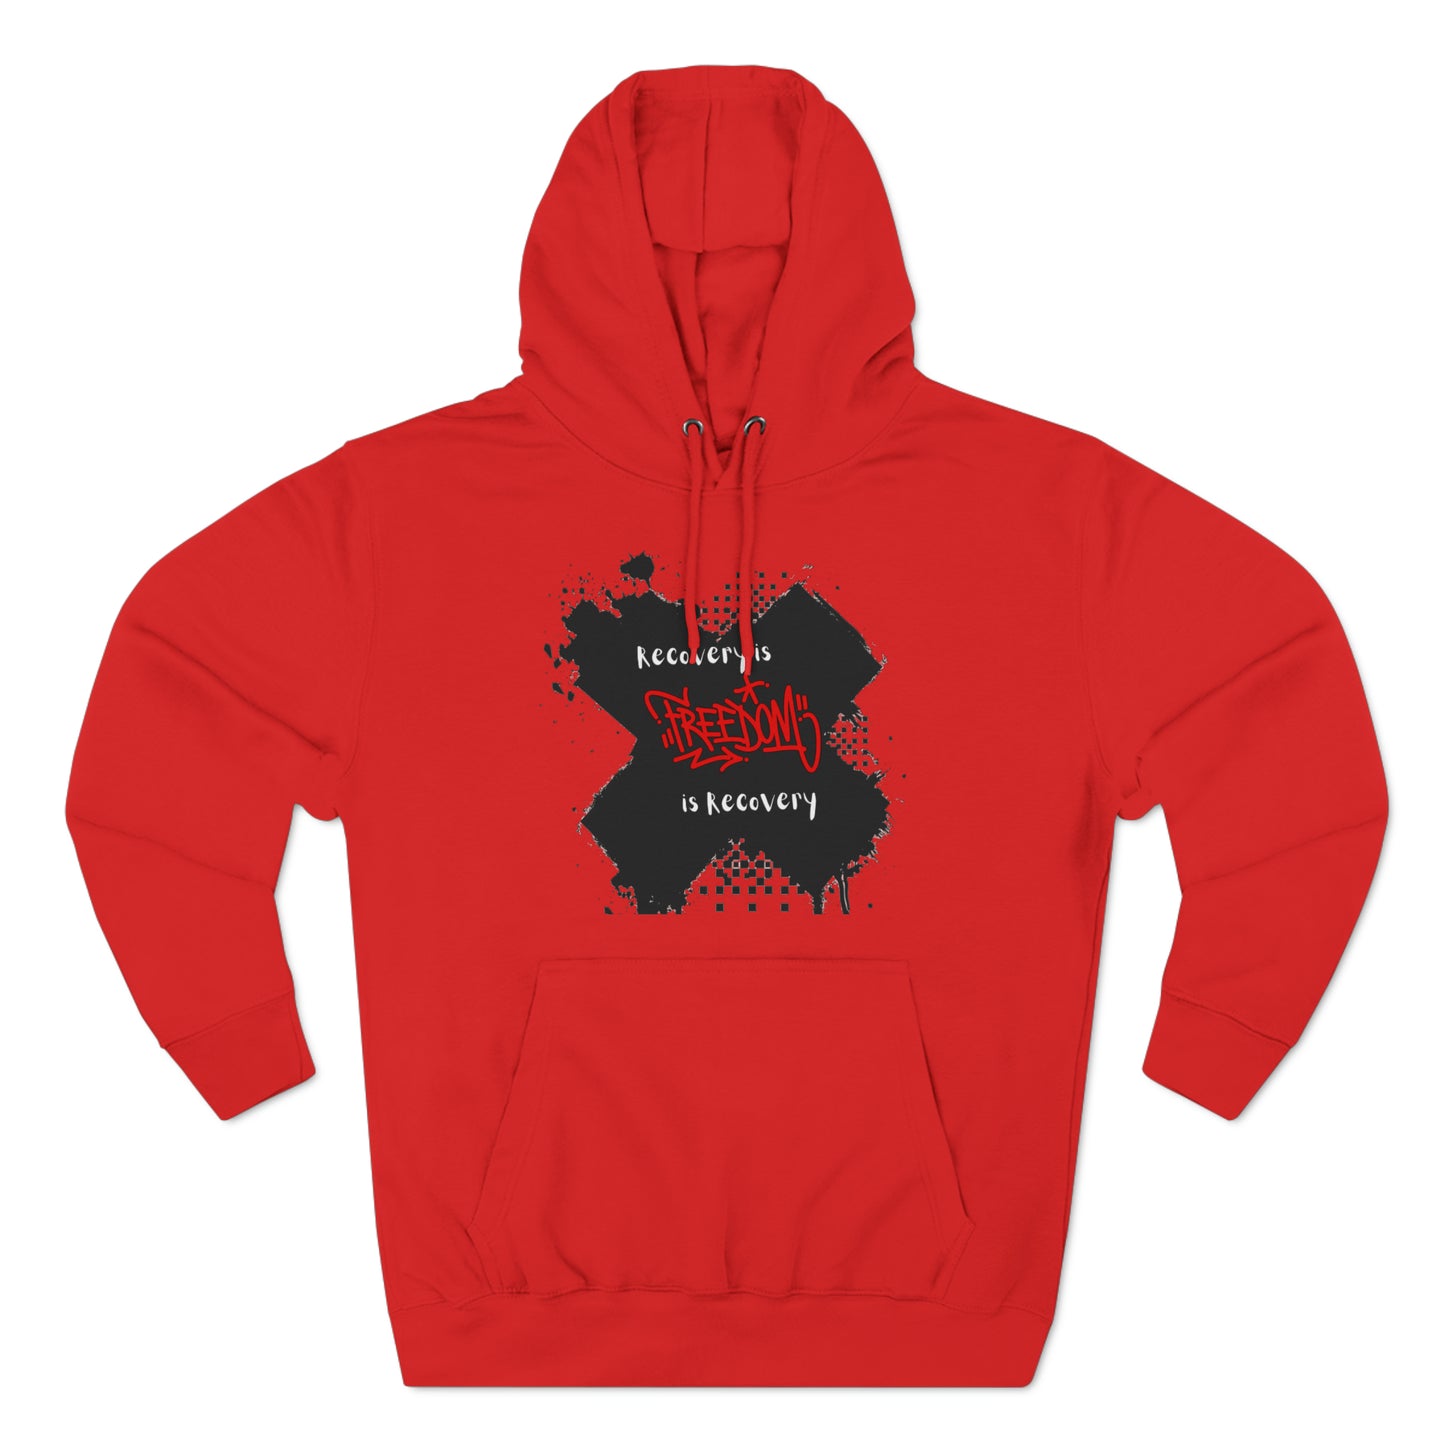 "Recovery is Freedom is Recovery" Soft Hoodie